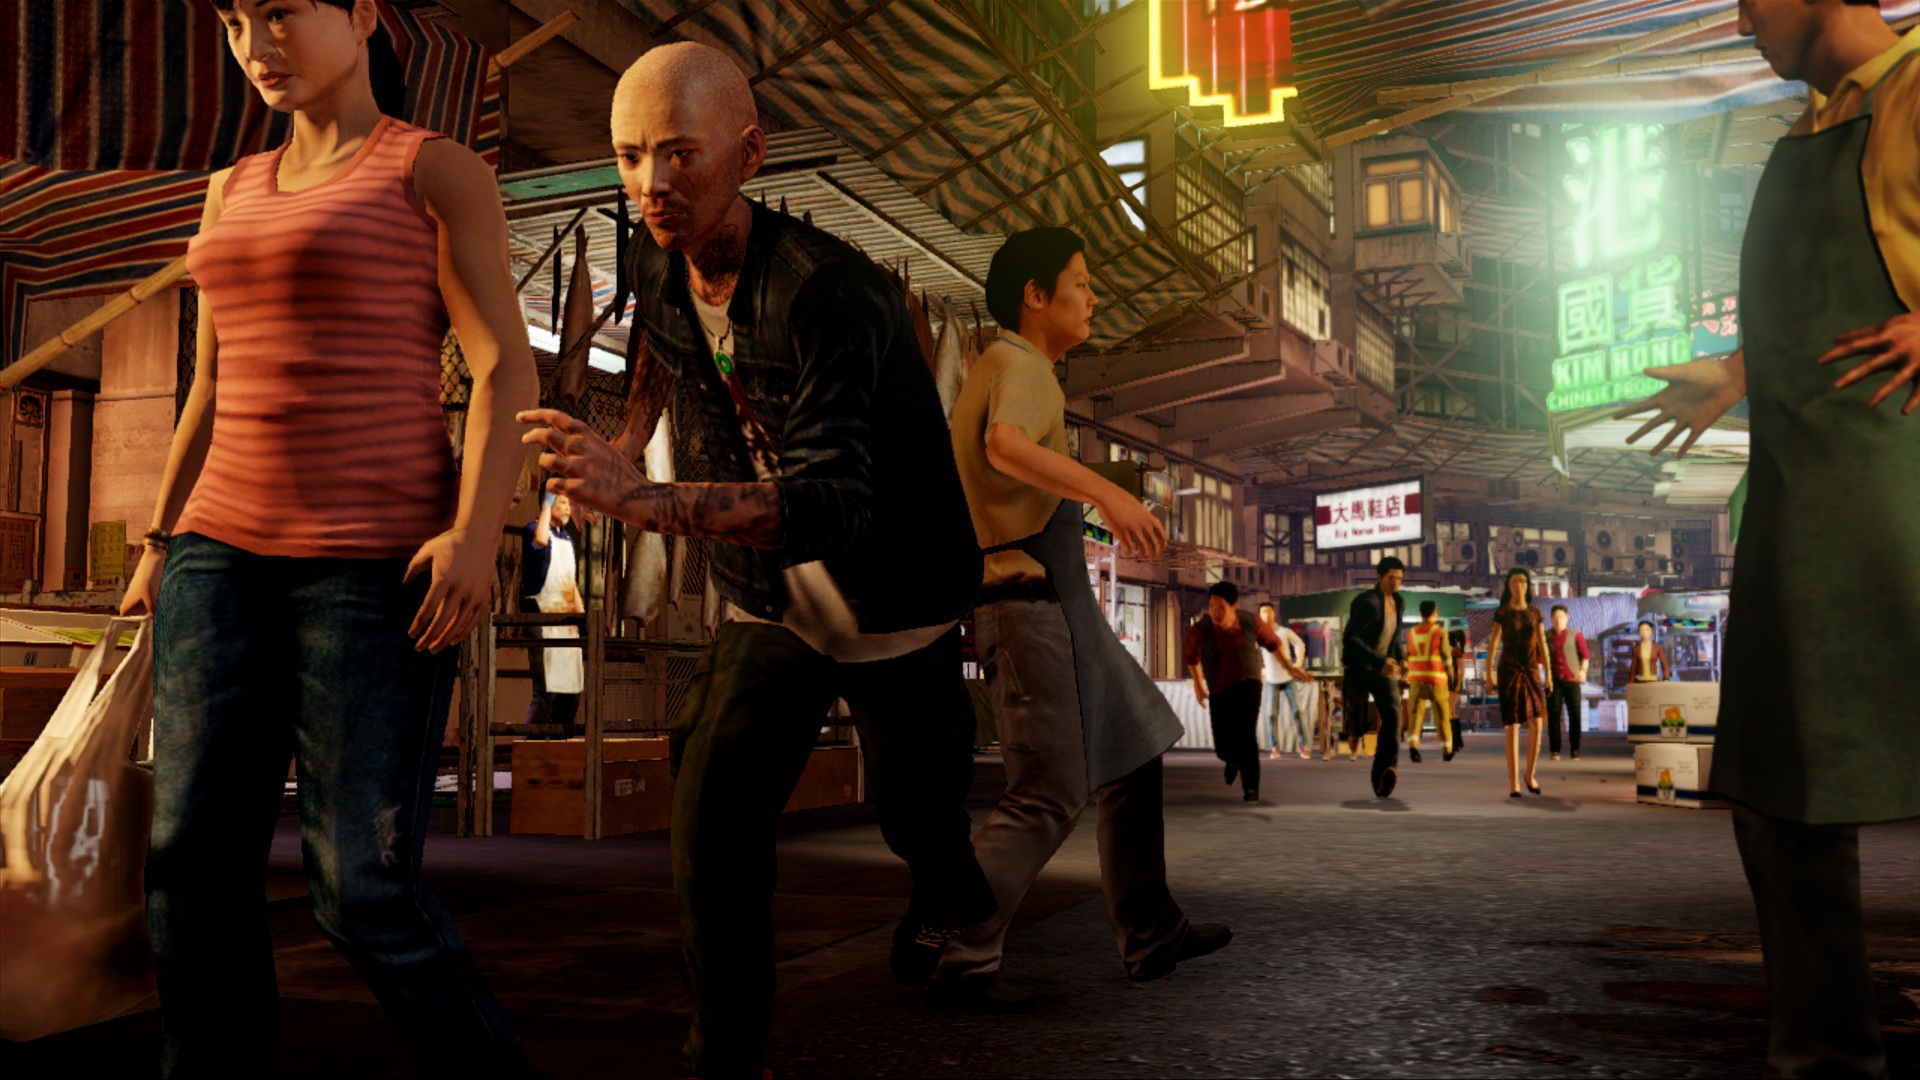 sleeping dogs game for pc